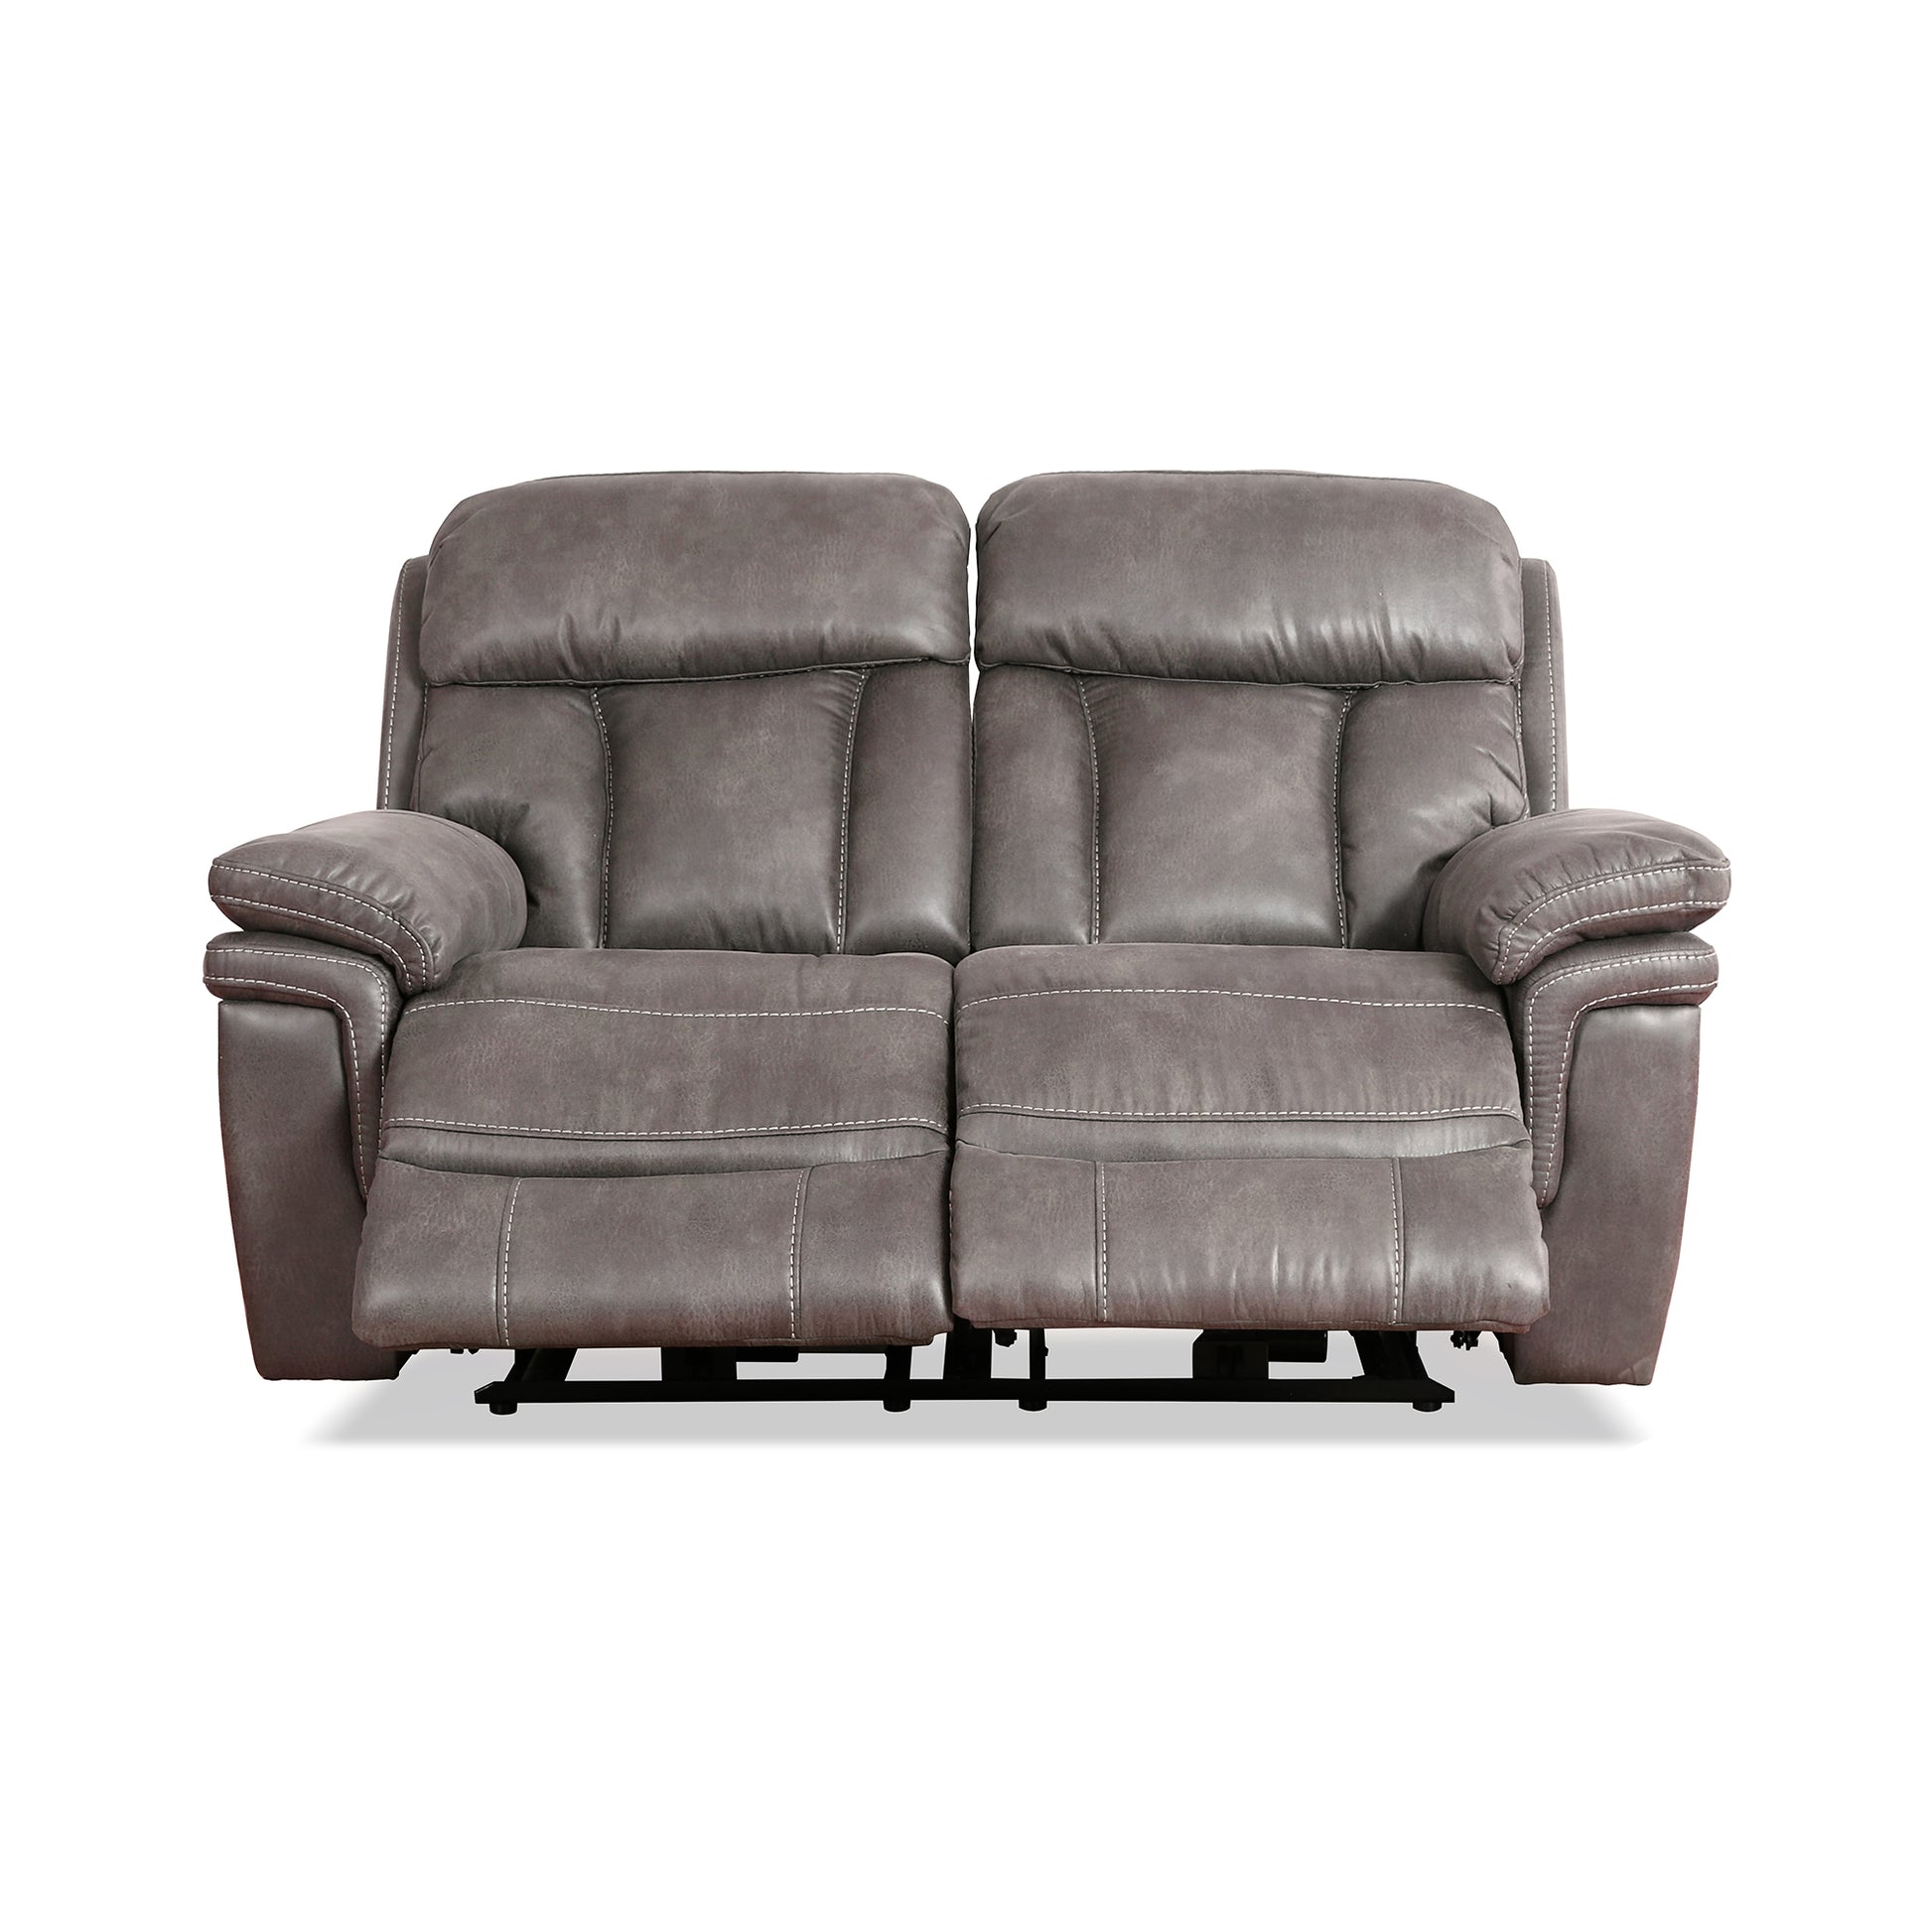 Claude Dual Power Headrest and Lumbar Support Recliner Chair in Light Grey  Genuine Leather